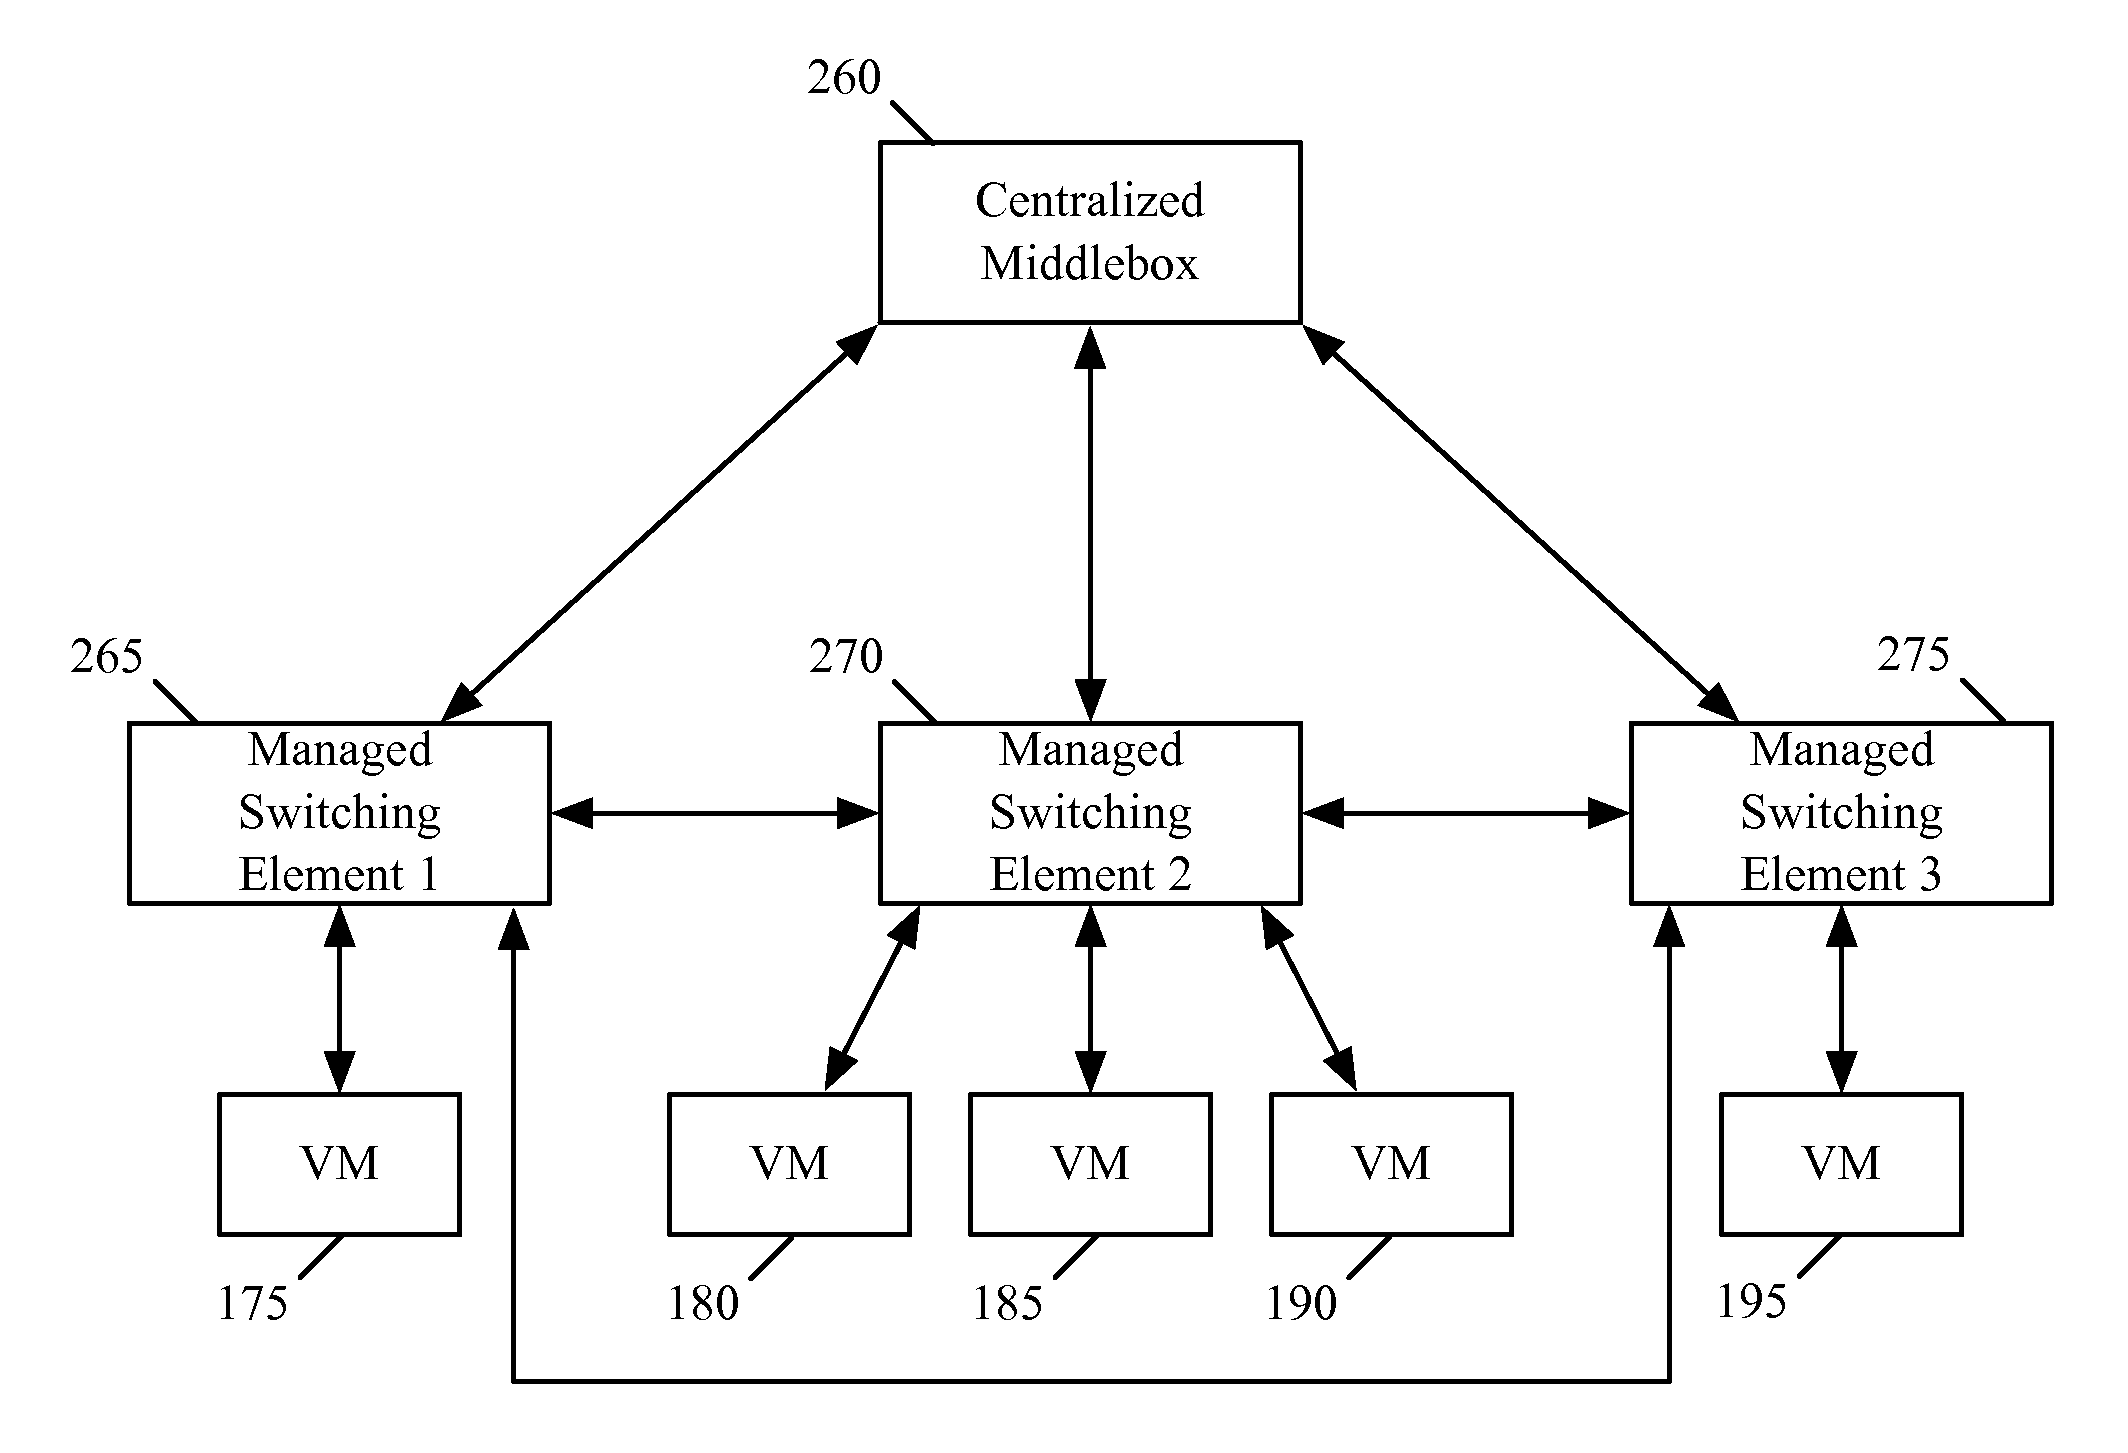 Control plane interface for logical middlebox services